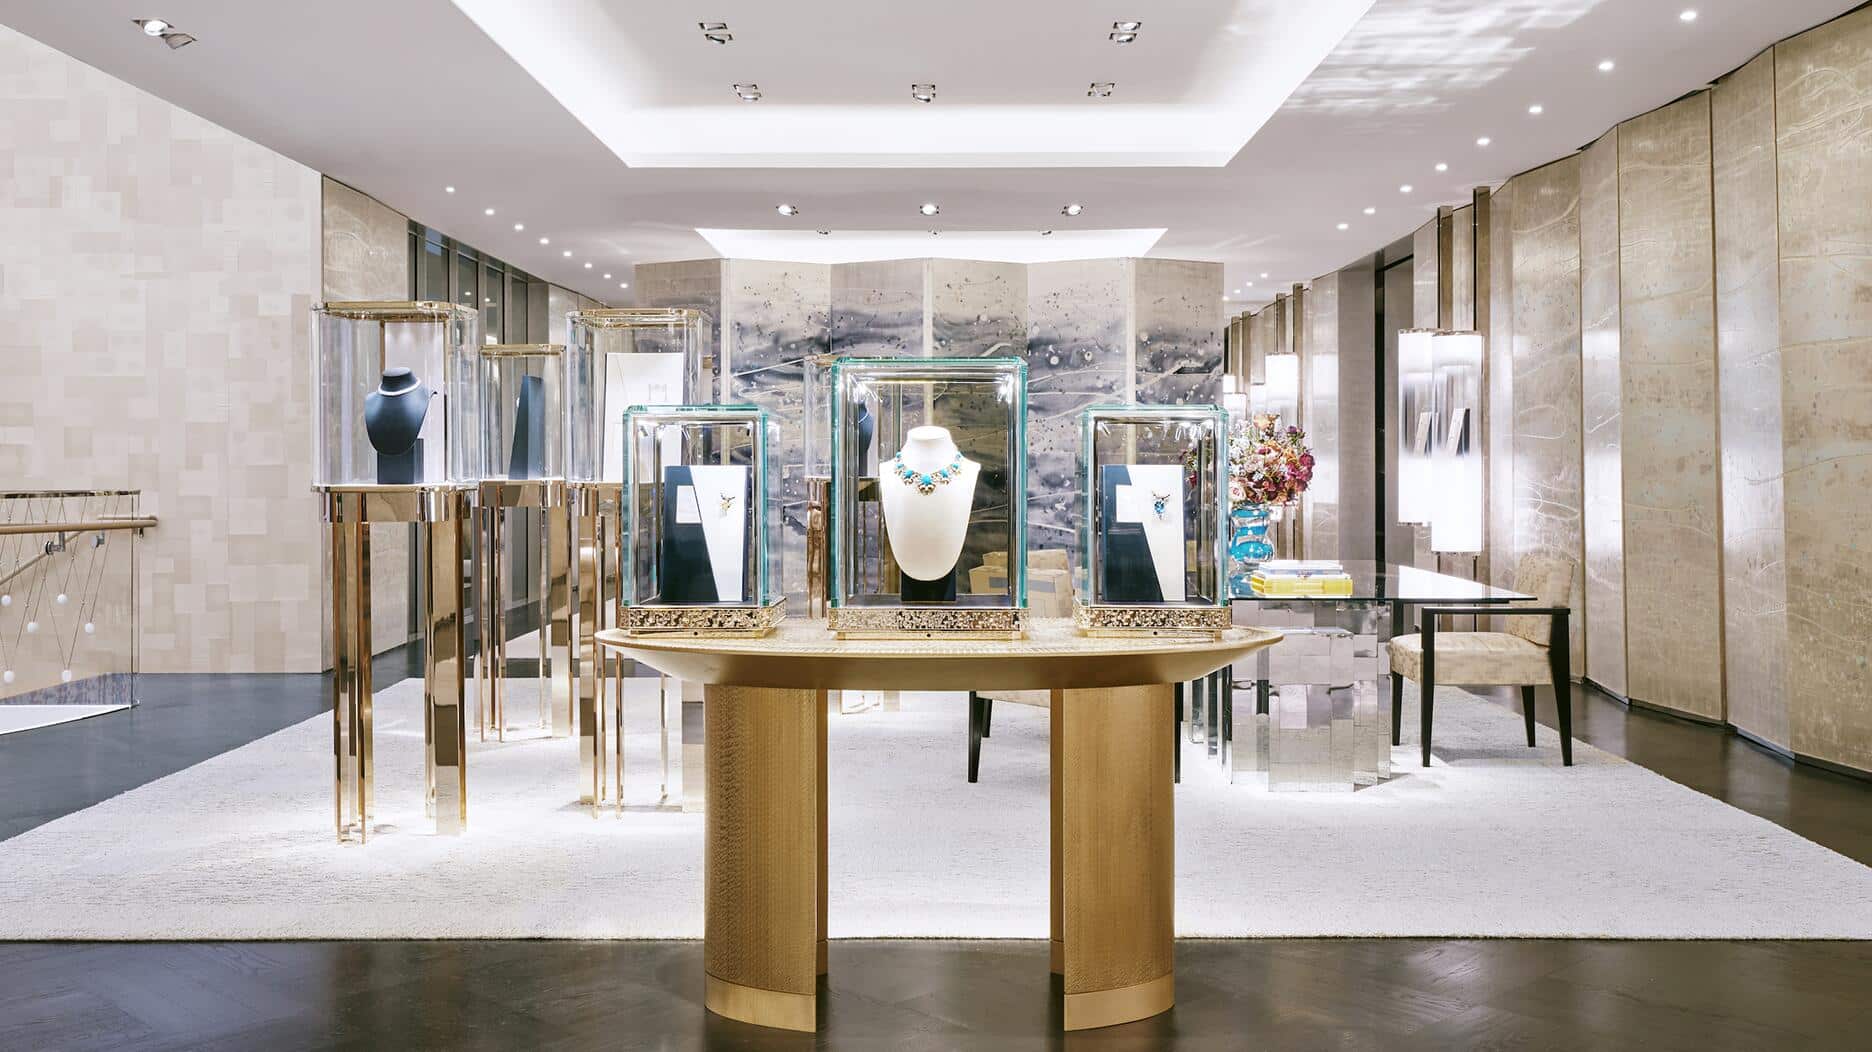 Tiffany and co is now part of the Louis Vuitton empire - Luxurylaunches